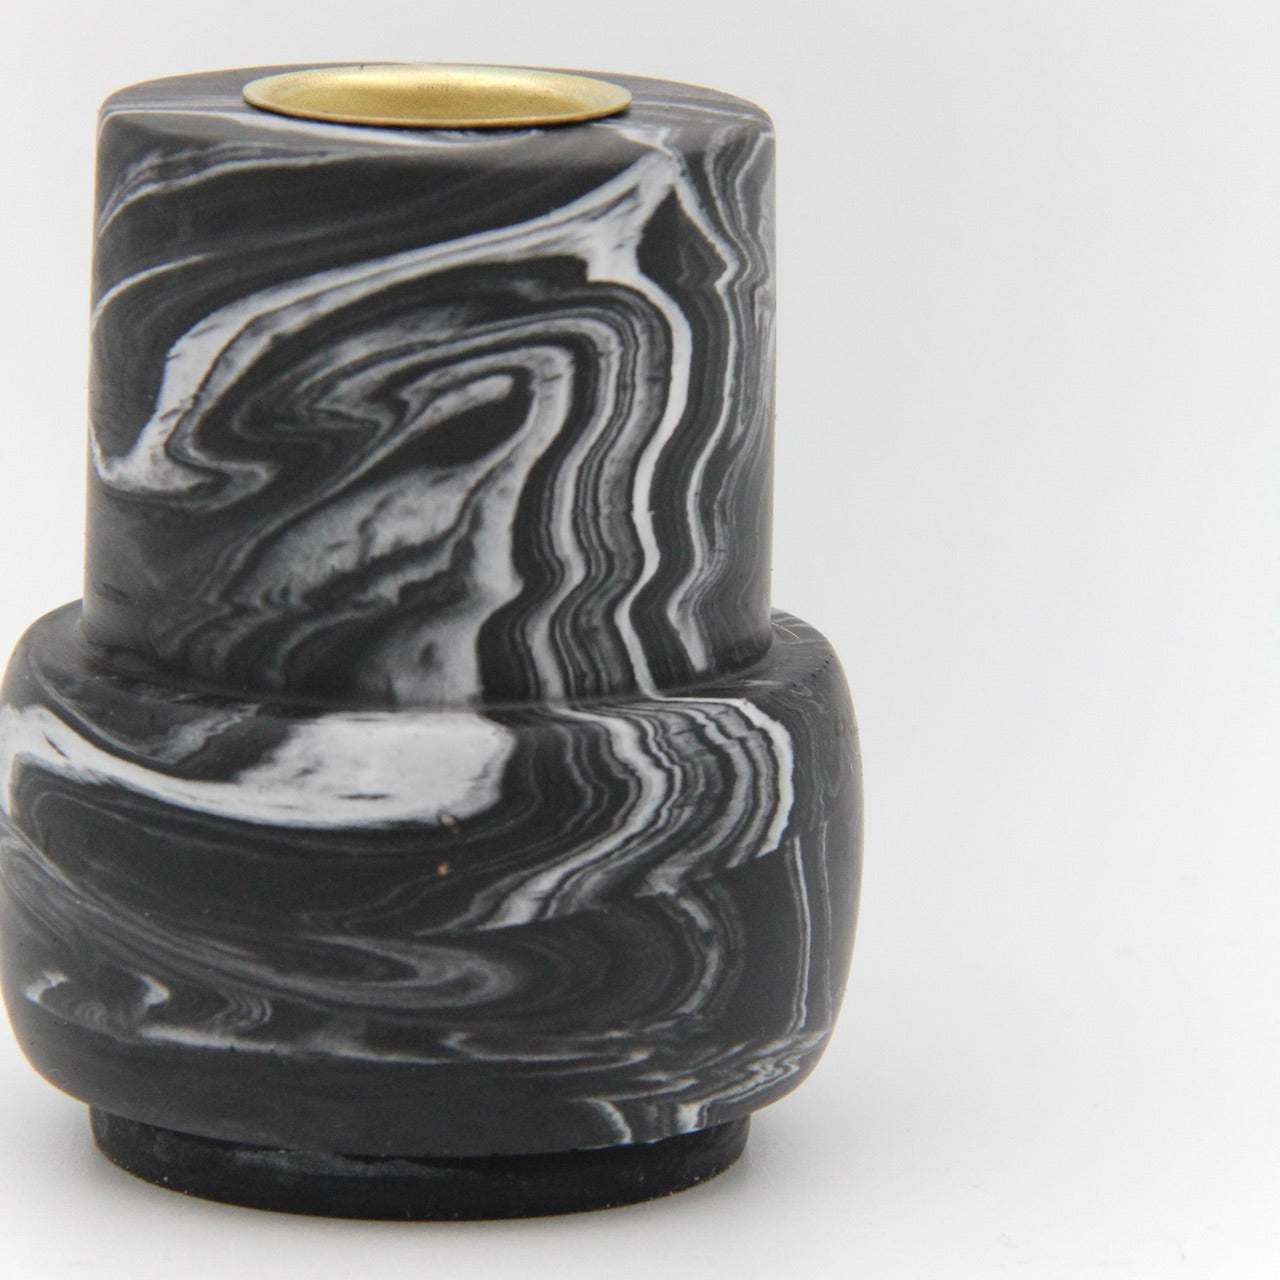 Molly stand - Black with white marble